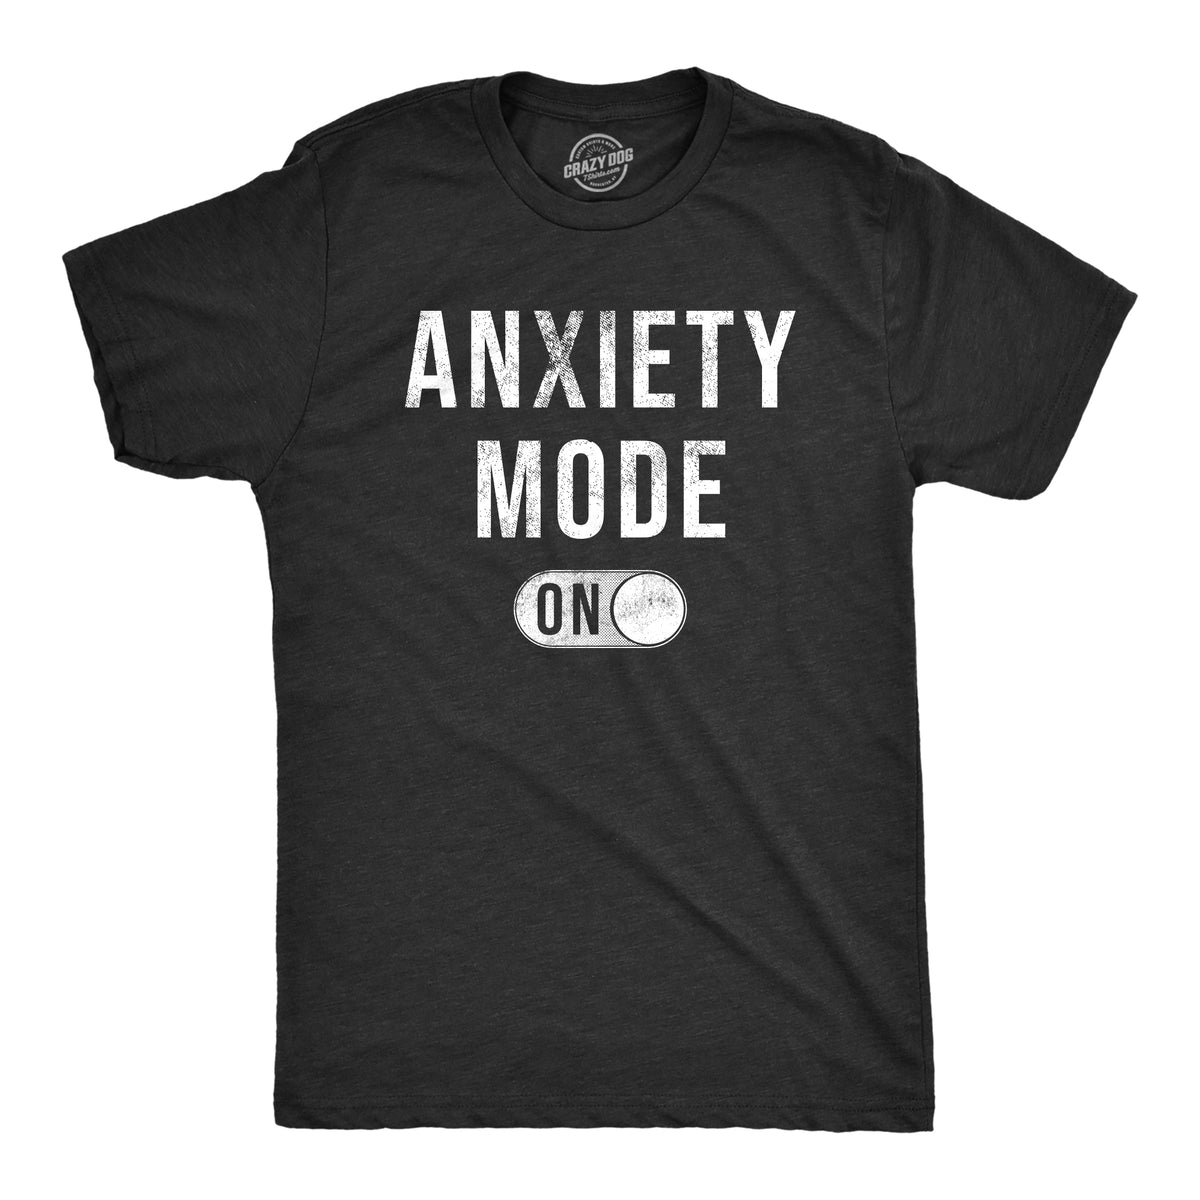 Funny Heather Black - ANXIETY Anxiety Mode On Mens T Shirt Nerdy Sarcastic Tee